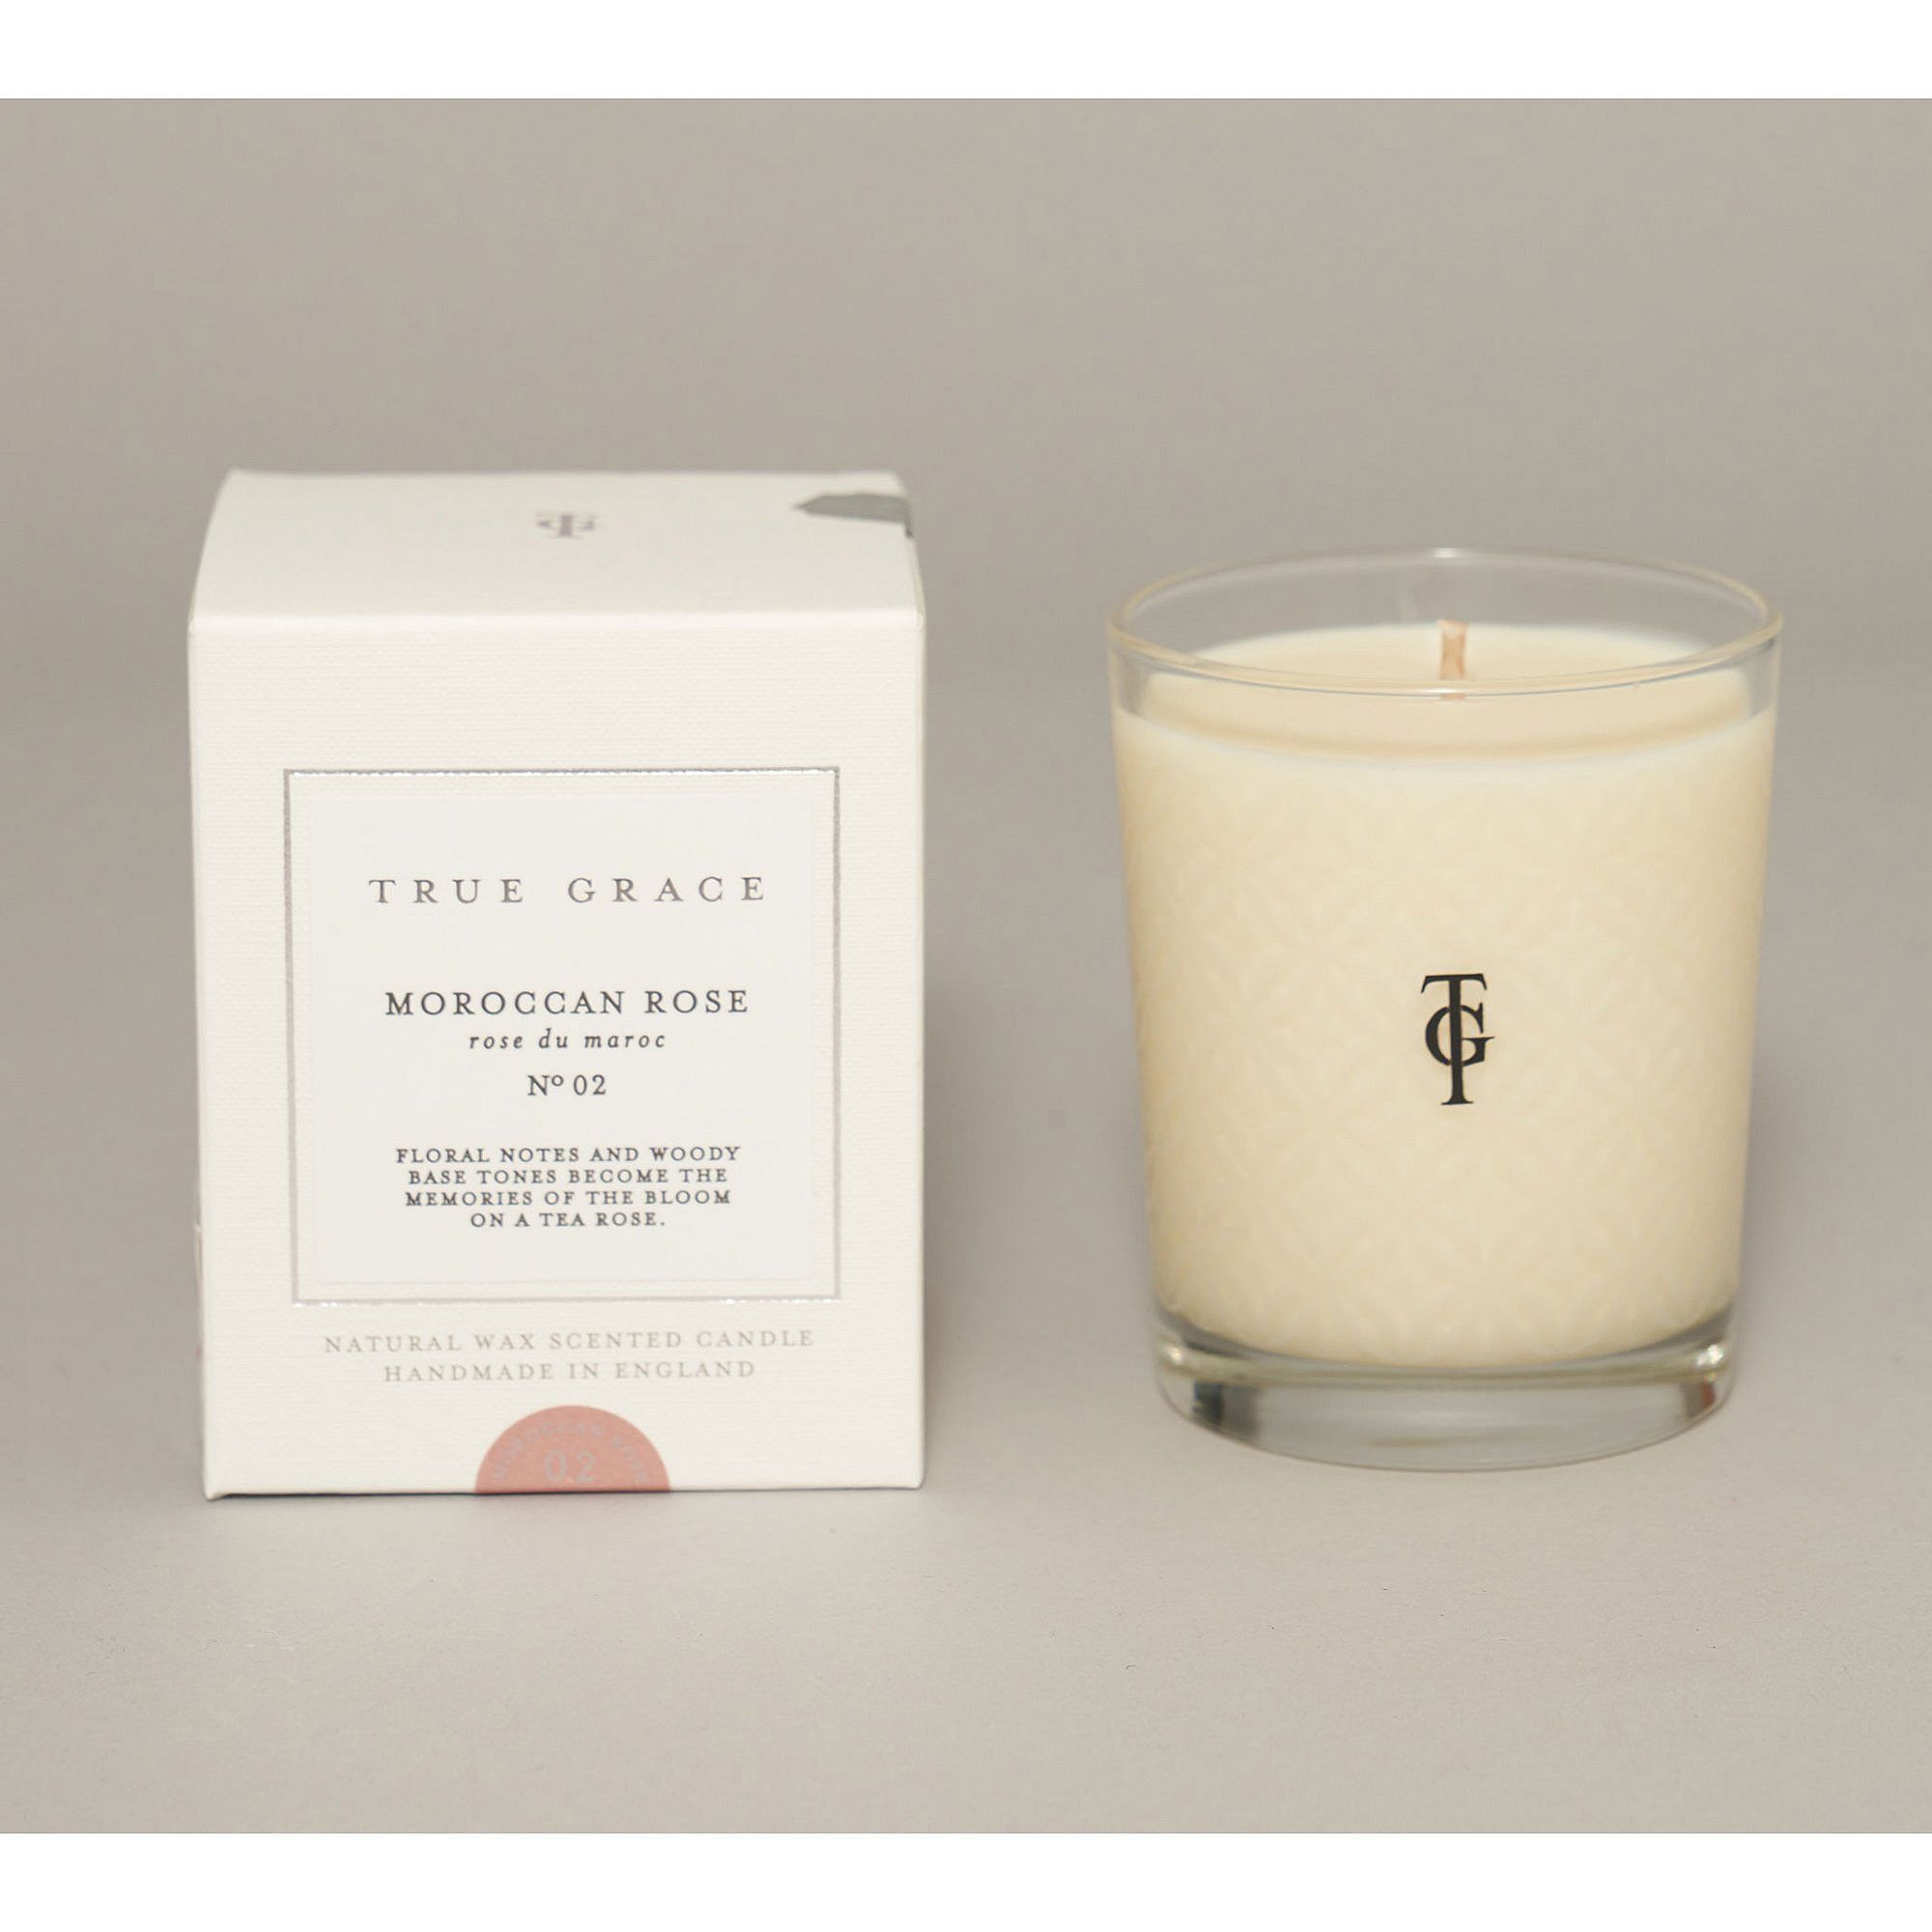 Moroccan Rose No.02 Candle, by True Grace - image 1